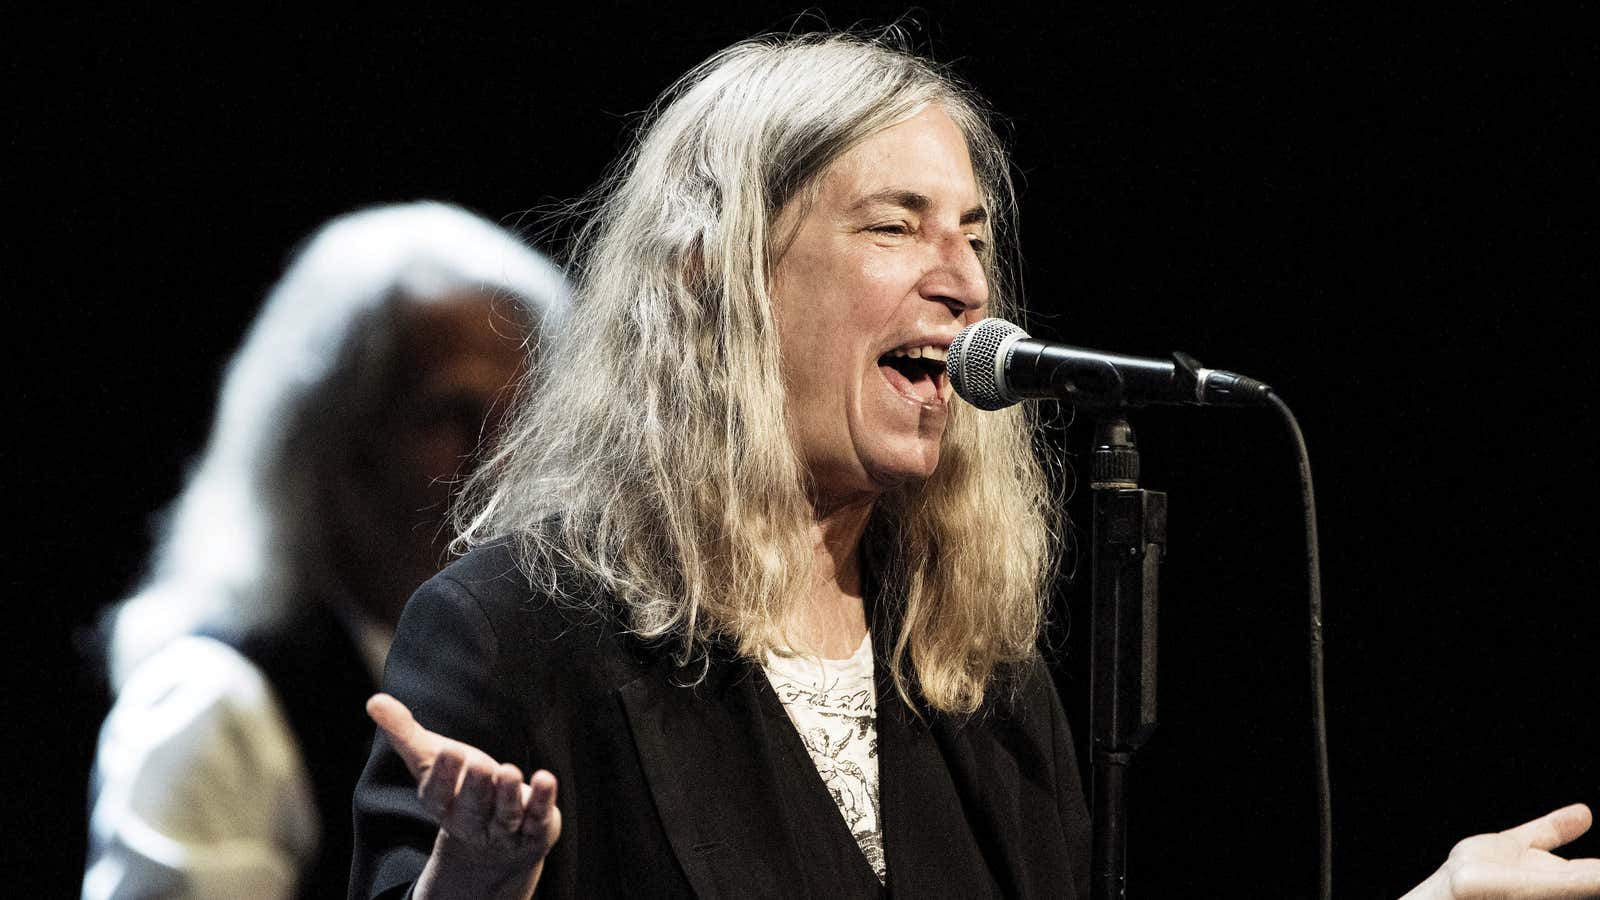 Patti Smith steps into Dylan’s shoes.